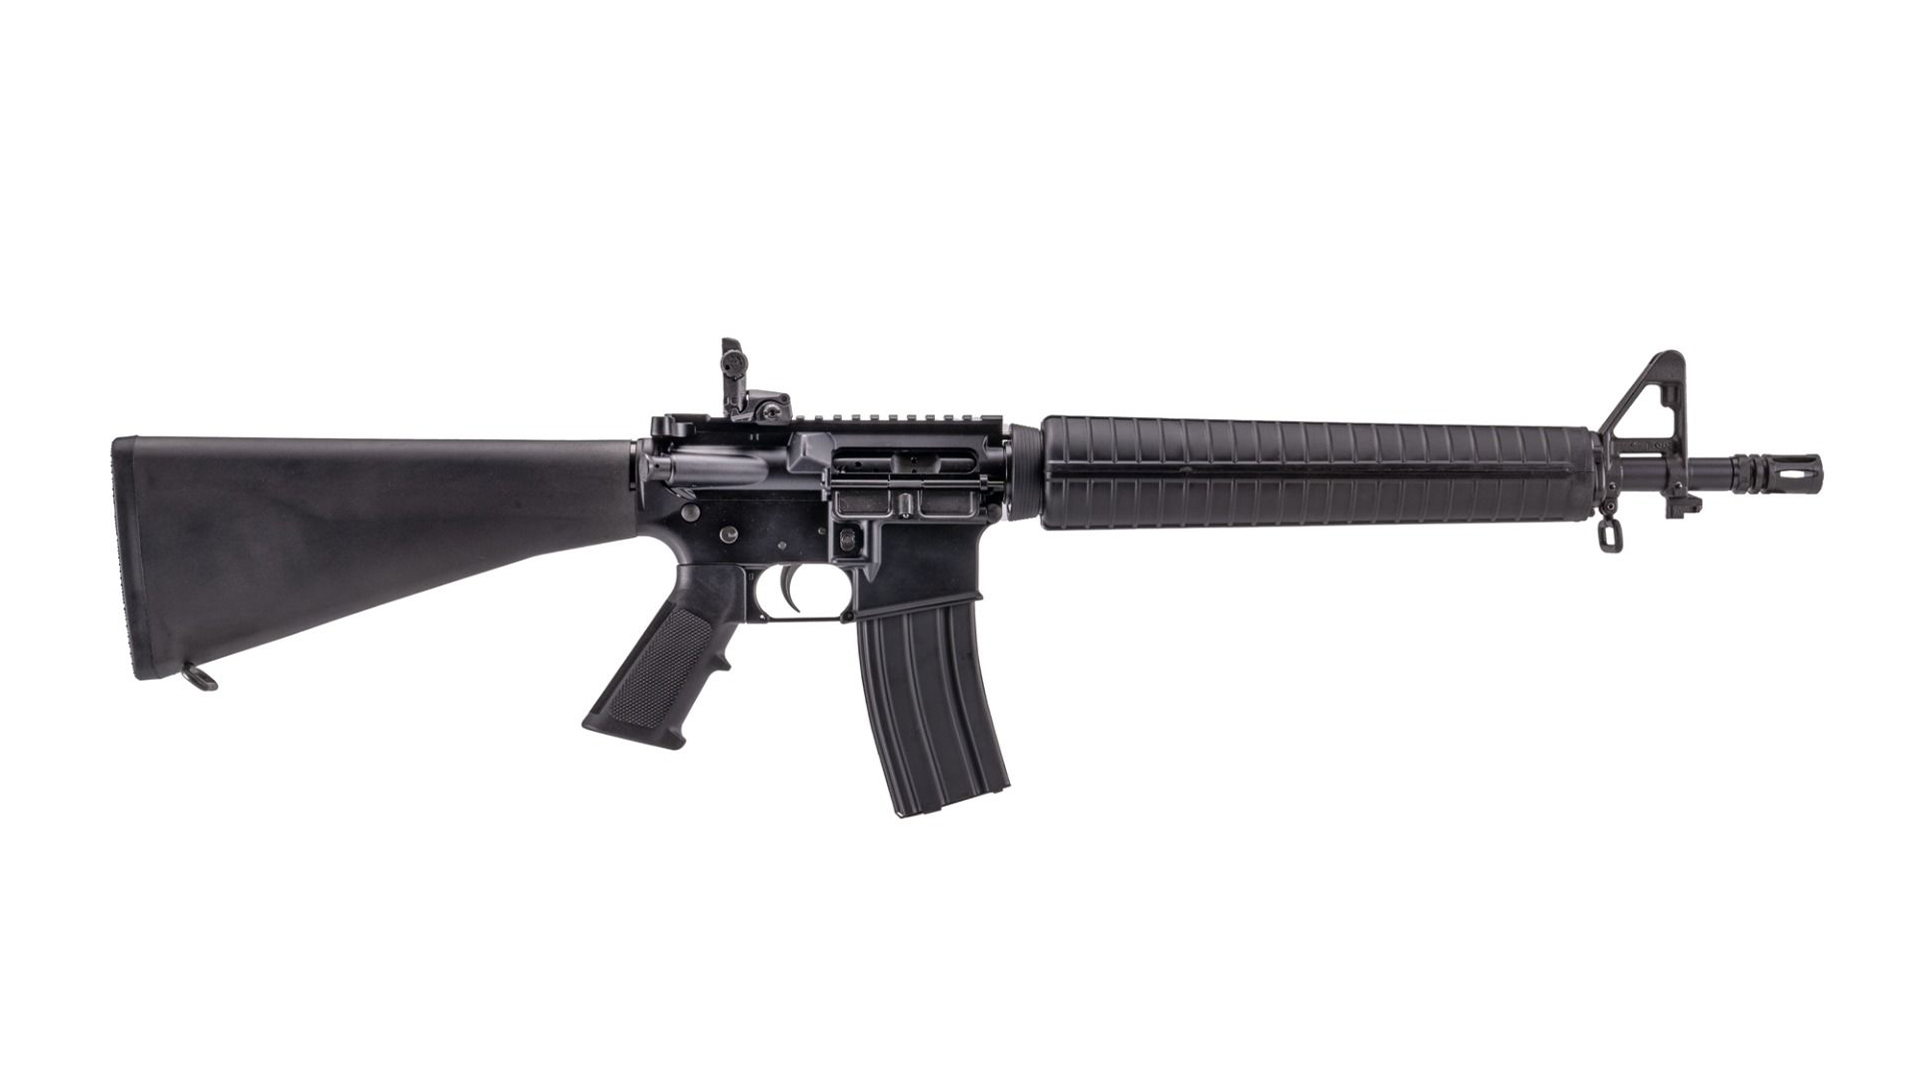 New For 2023: Anderson Mfg. AM-15 Dissipator - Guns in the News